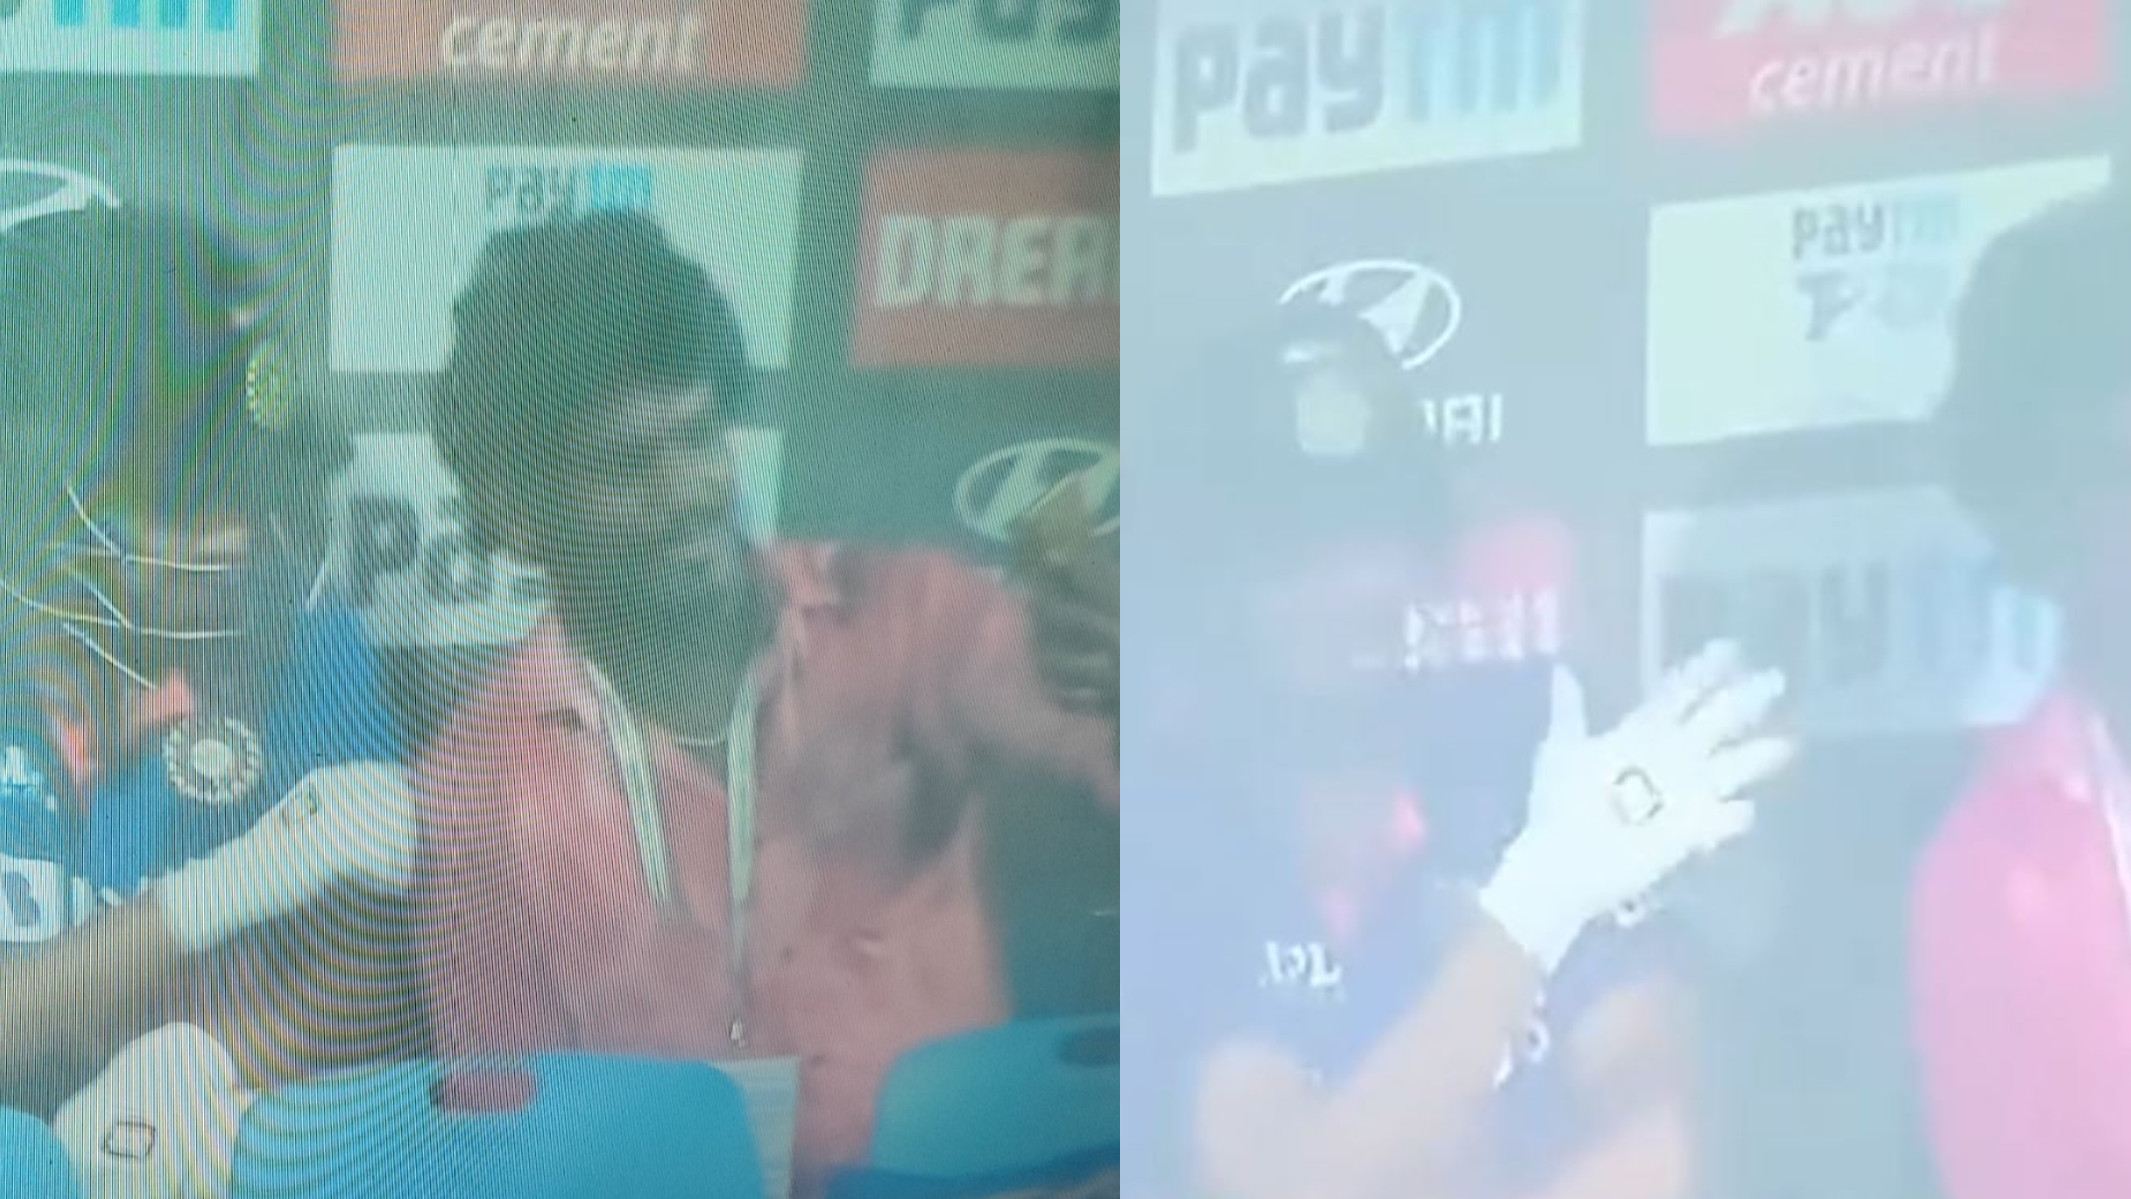 WATCH- Ruturaj Gaikwad rebukes ground staff wanting a selfie; Twitter divided, some criticize, some defend him